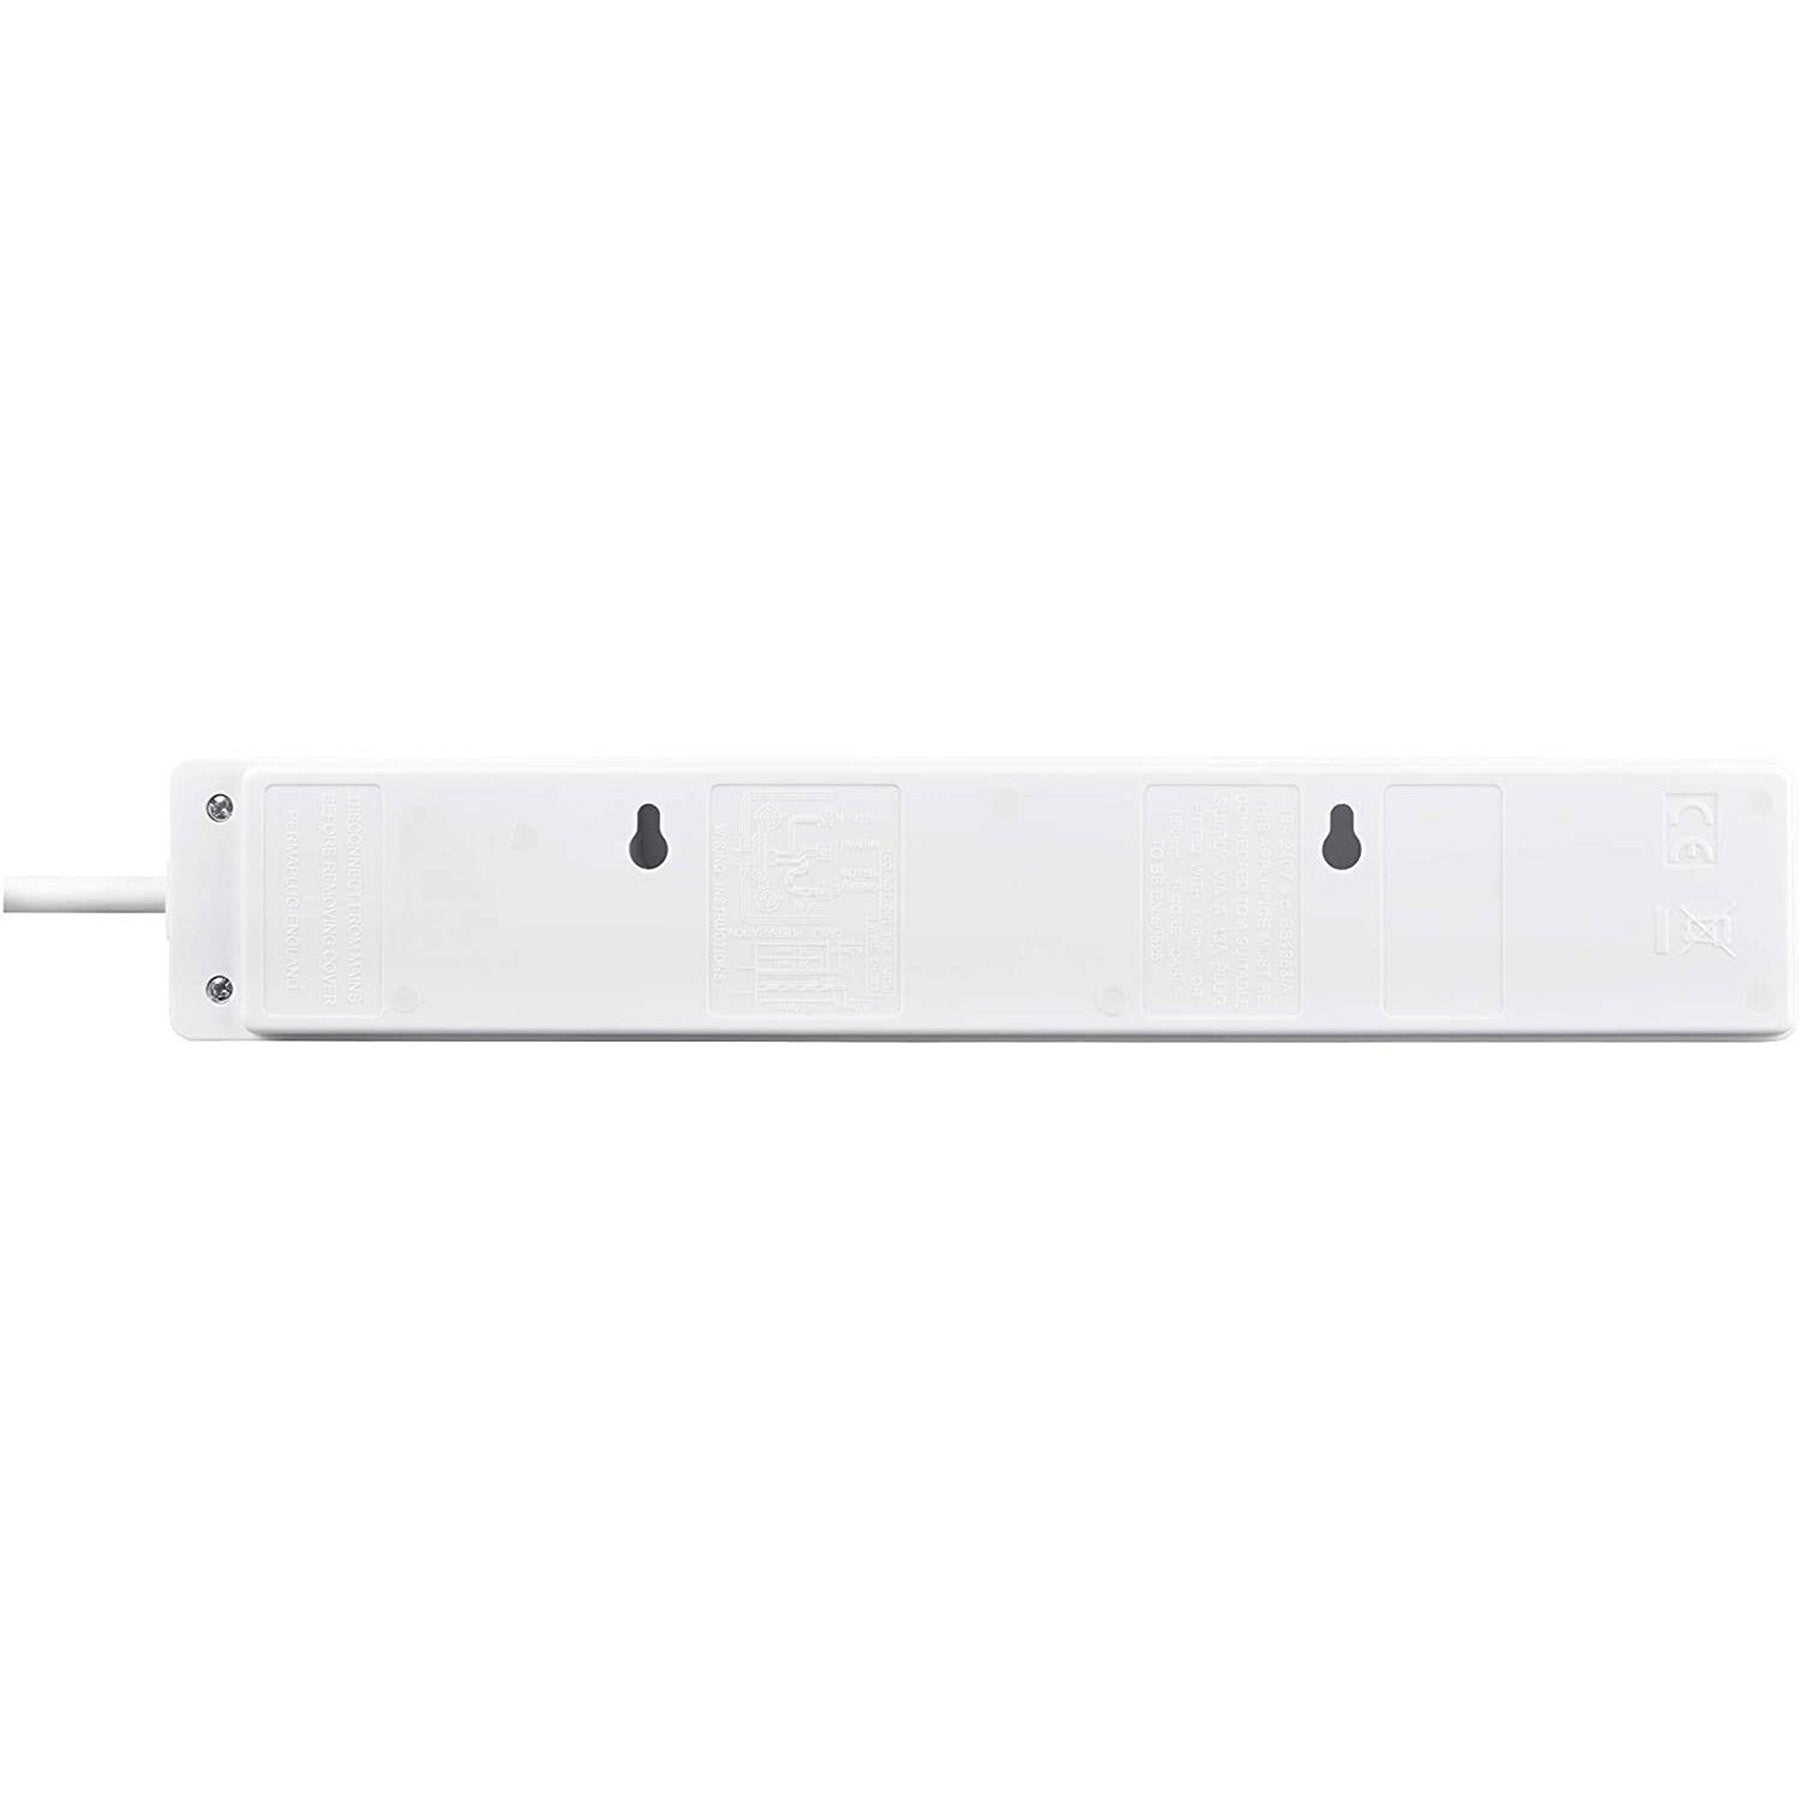 Electrical extension with 4 sockets , White Color